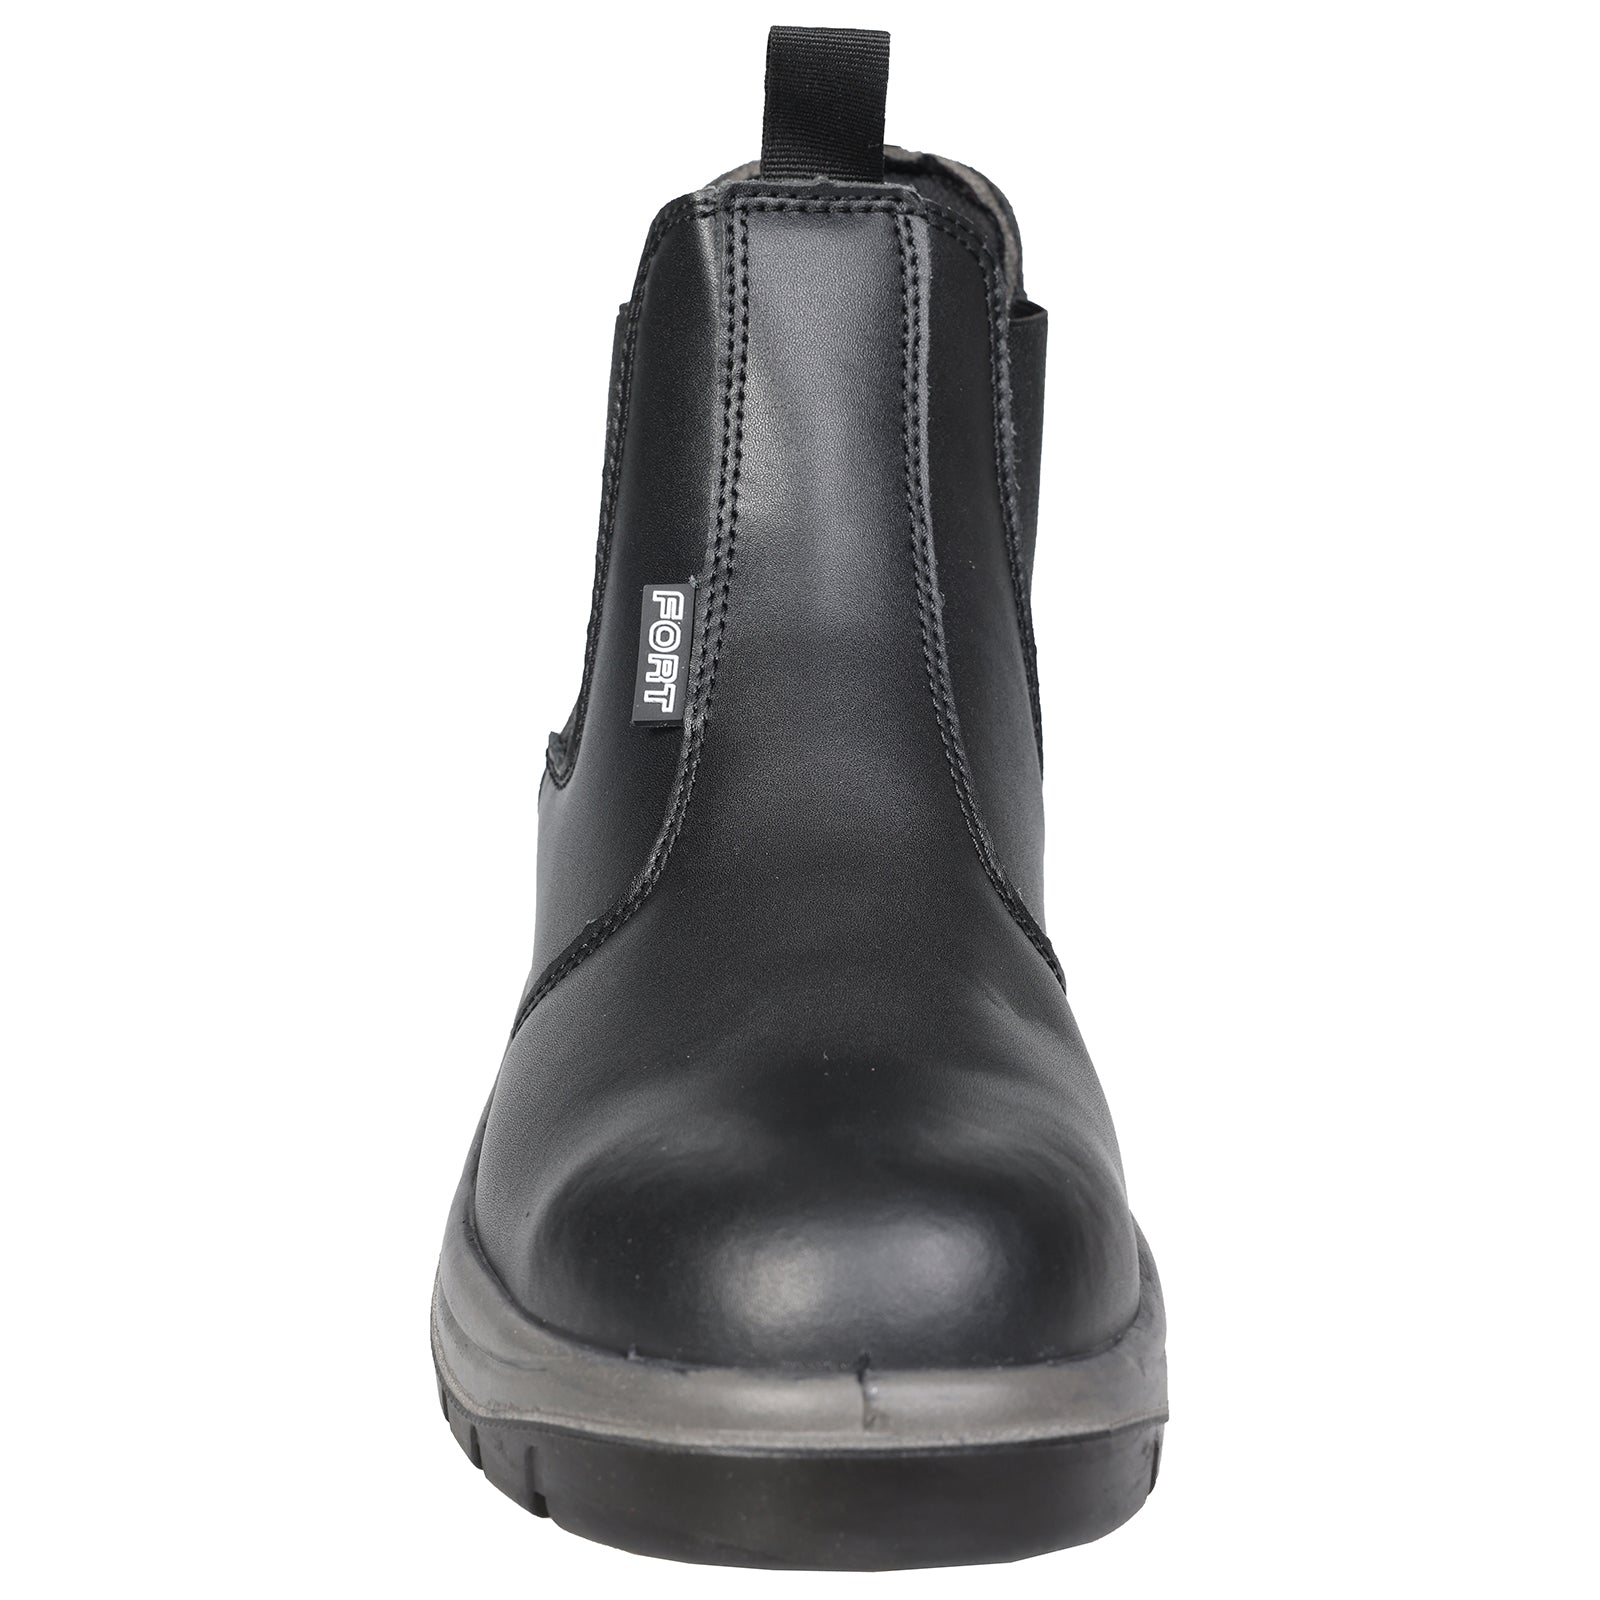 FORT NELSON SAFETY BOOT (FF103)